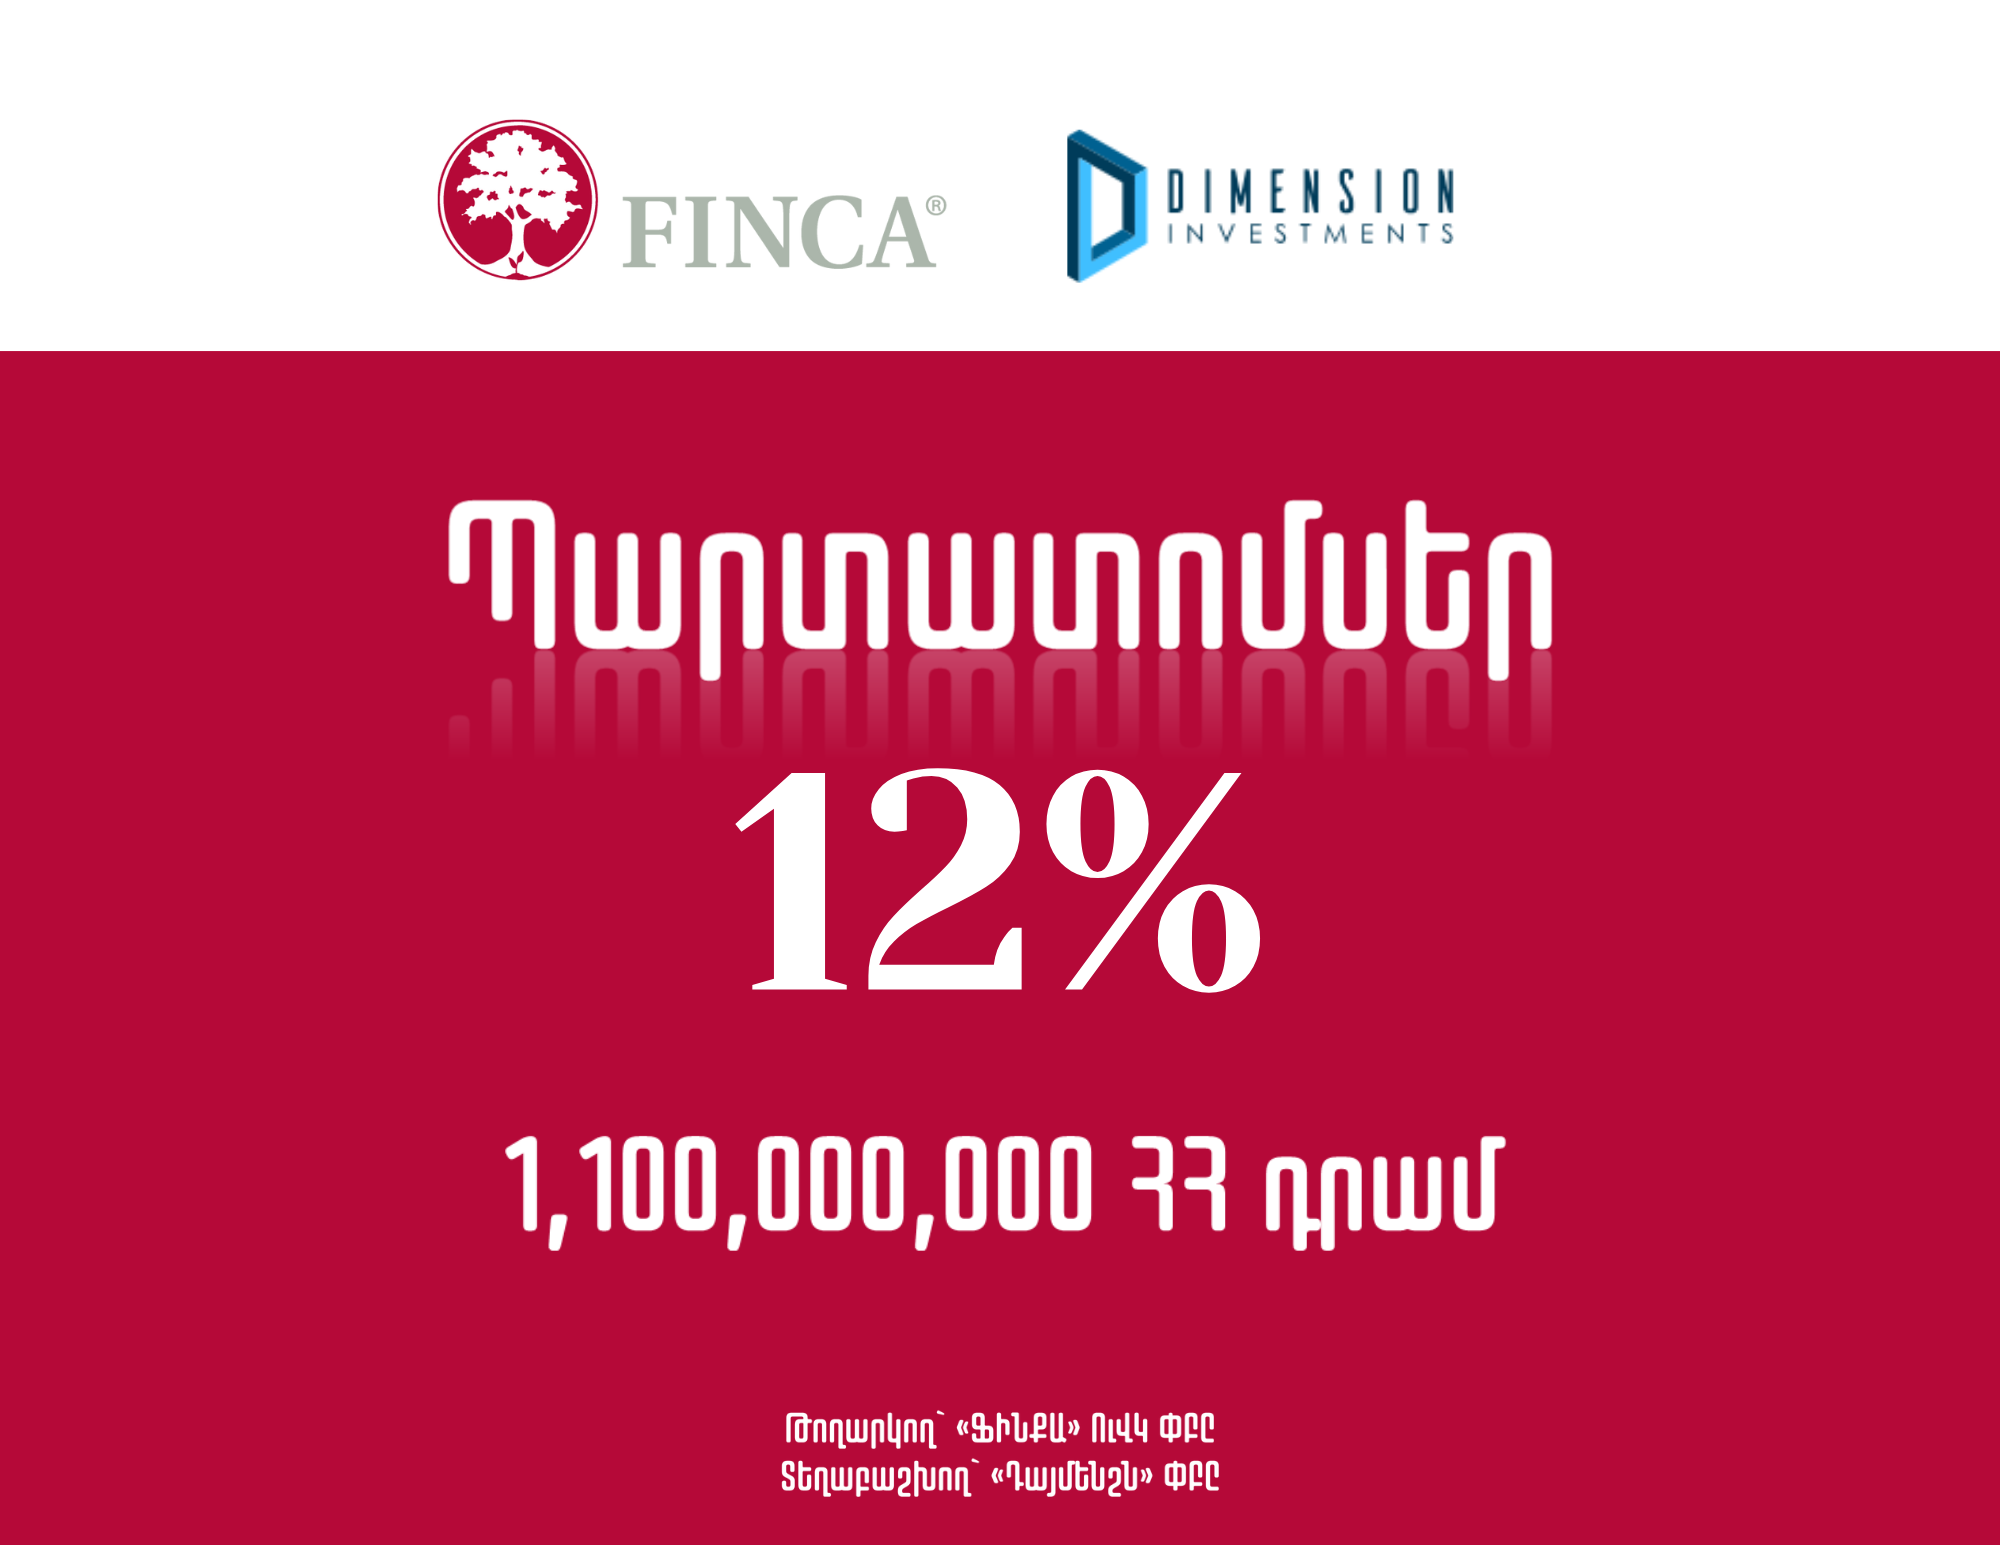  Dimension Investments plans to start the placement of "Finca" UCO CJSC՛s AMD-denominated 12% fixed-rate coupon bonds on June 25.